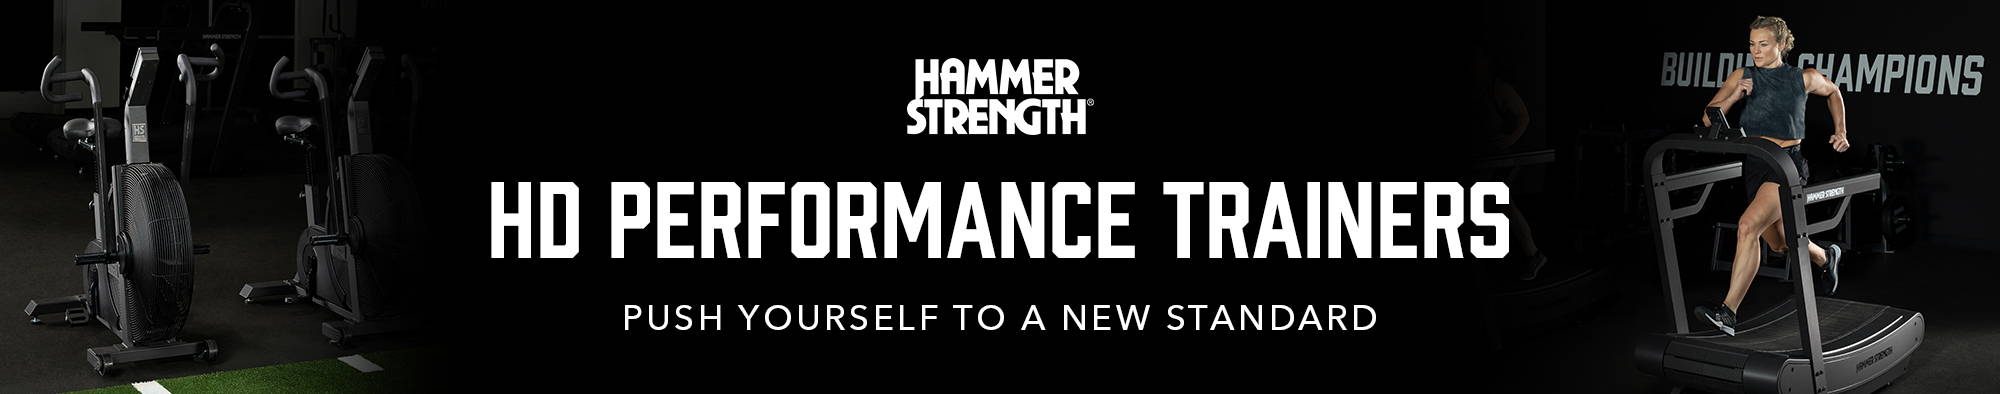 Hammer Strength HD Performance Trainers